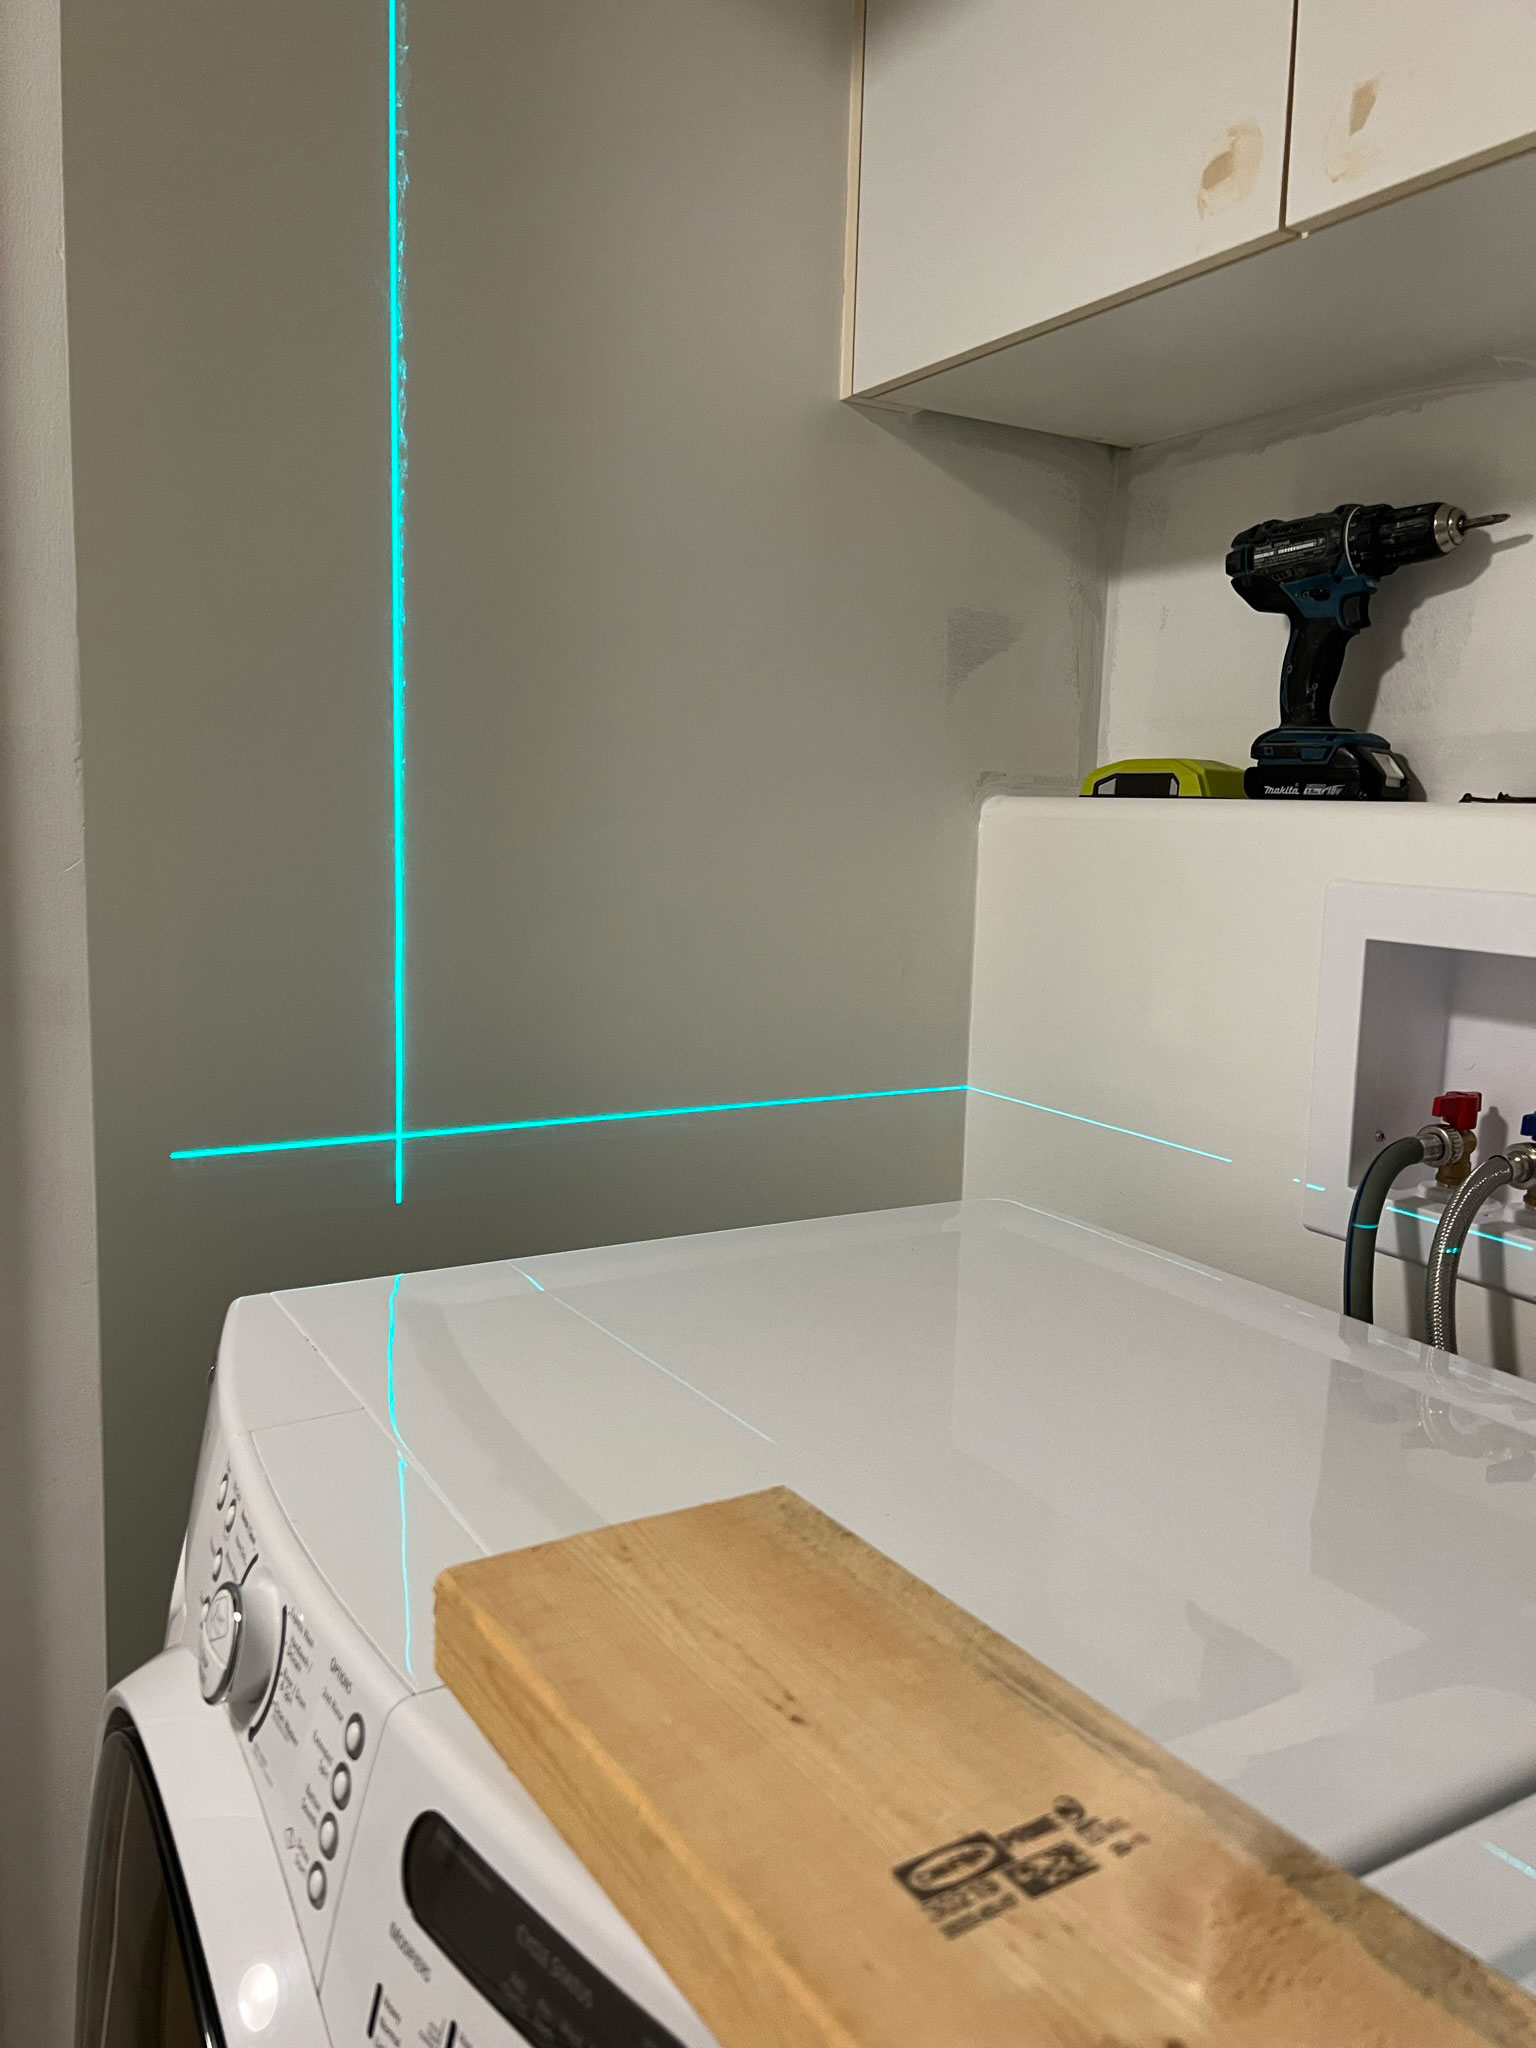 laser level projecting on the wall about 2" above the height of a washer and dryer in a laundry closet